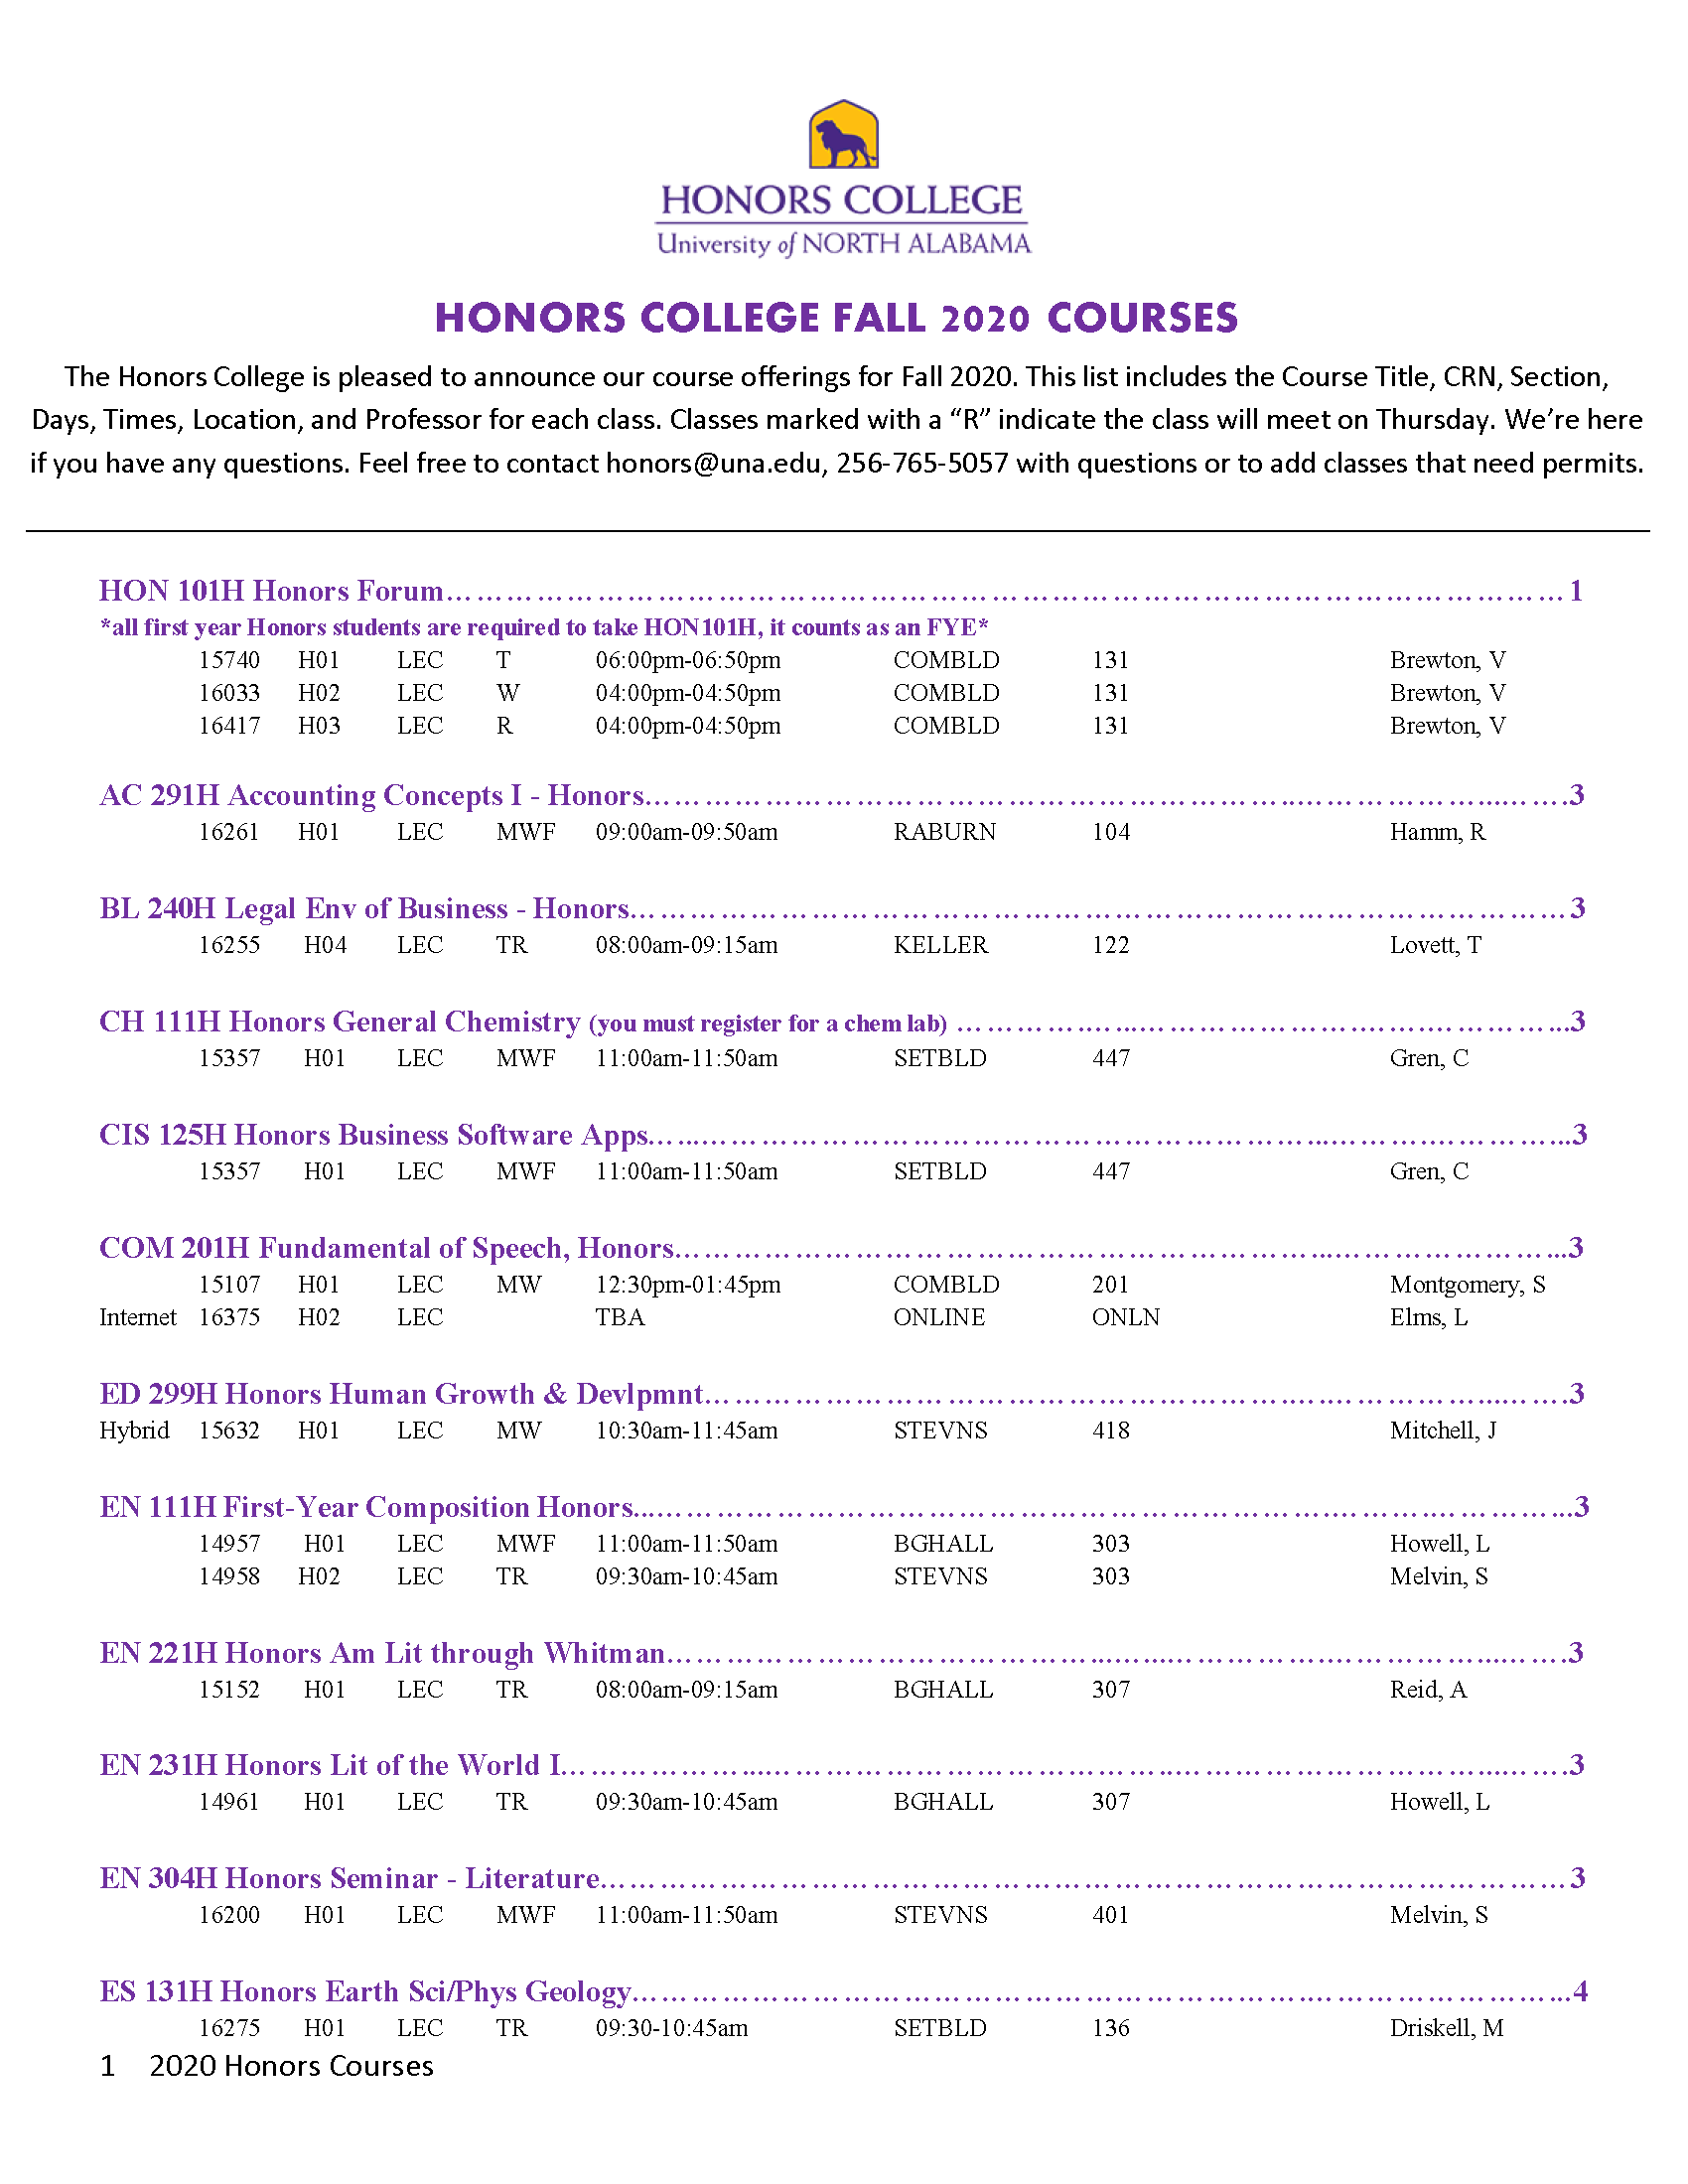 Honors Fall Courses